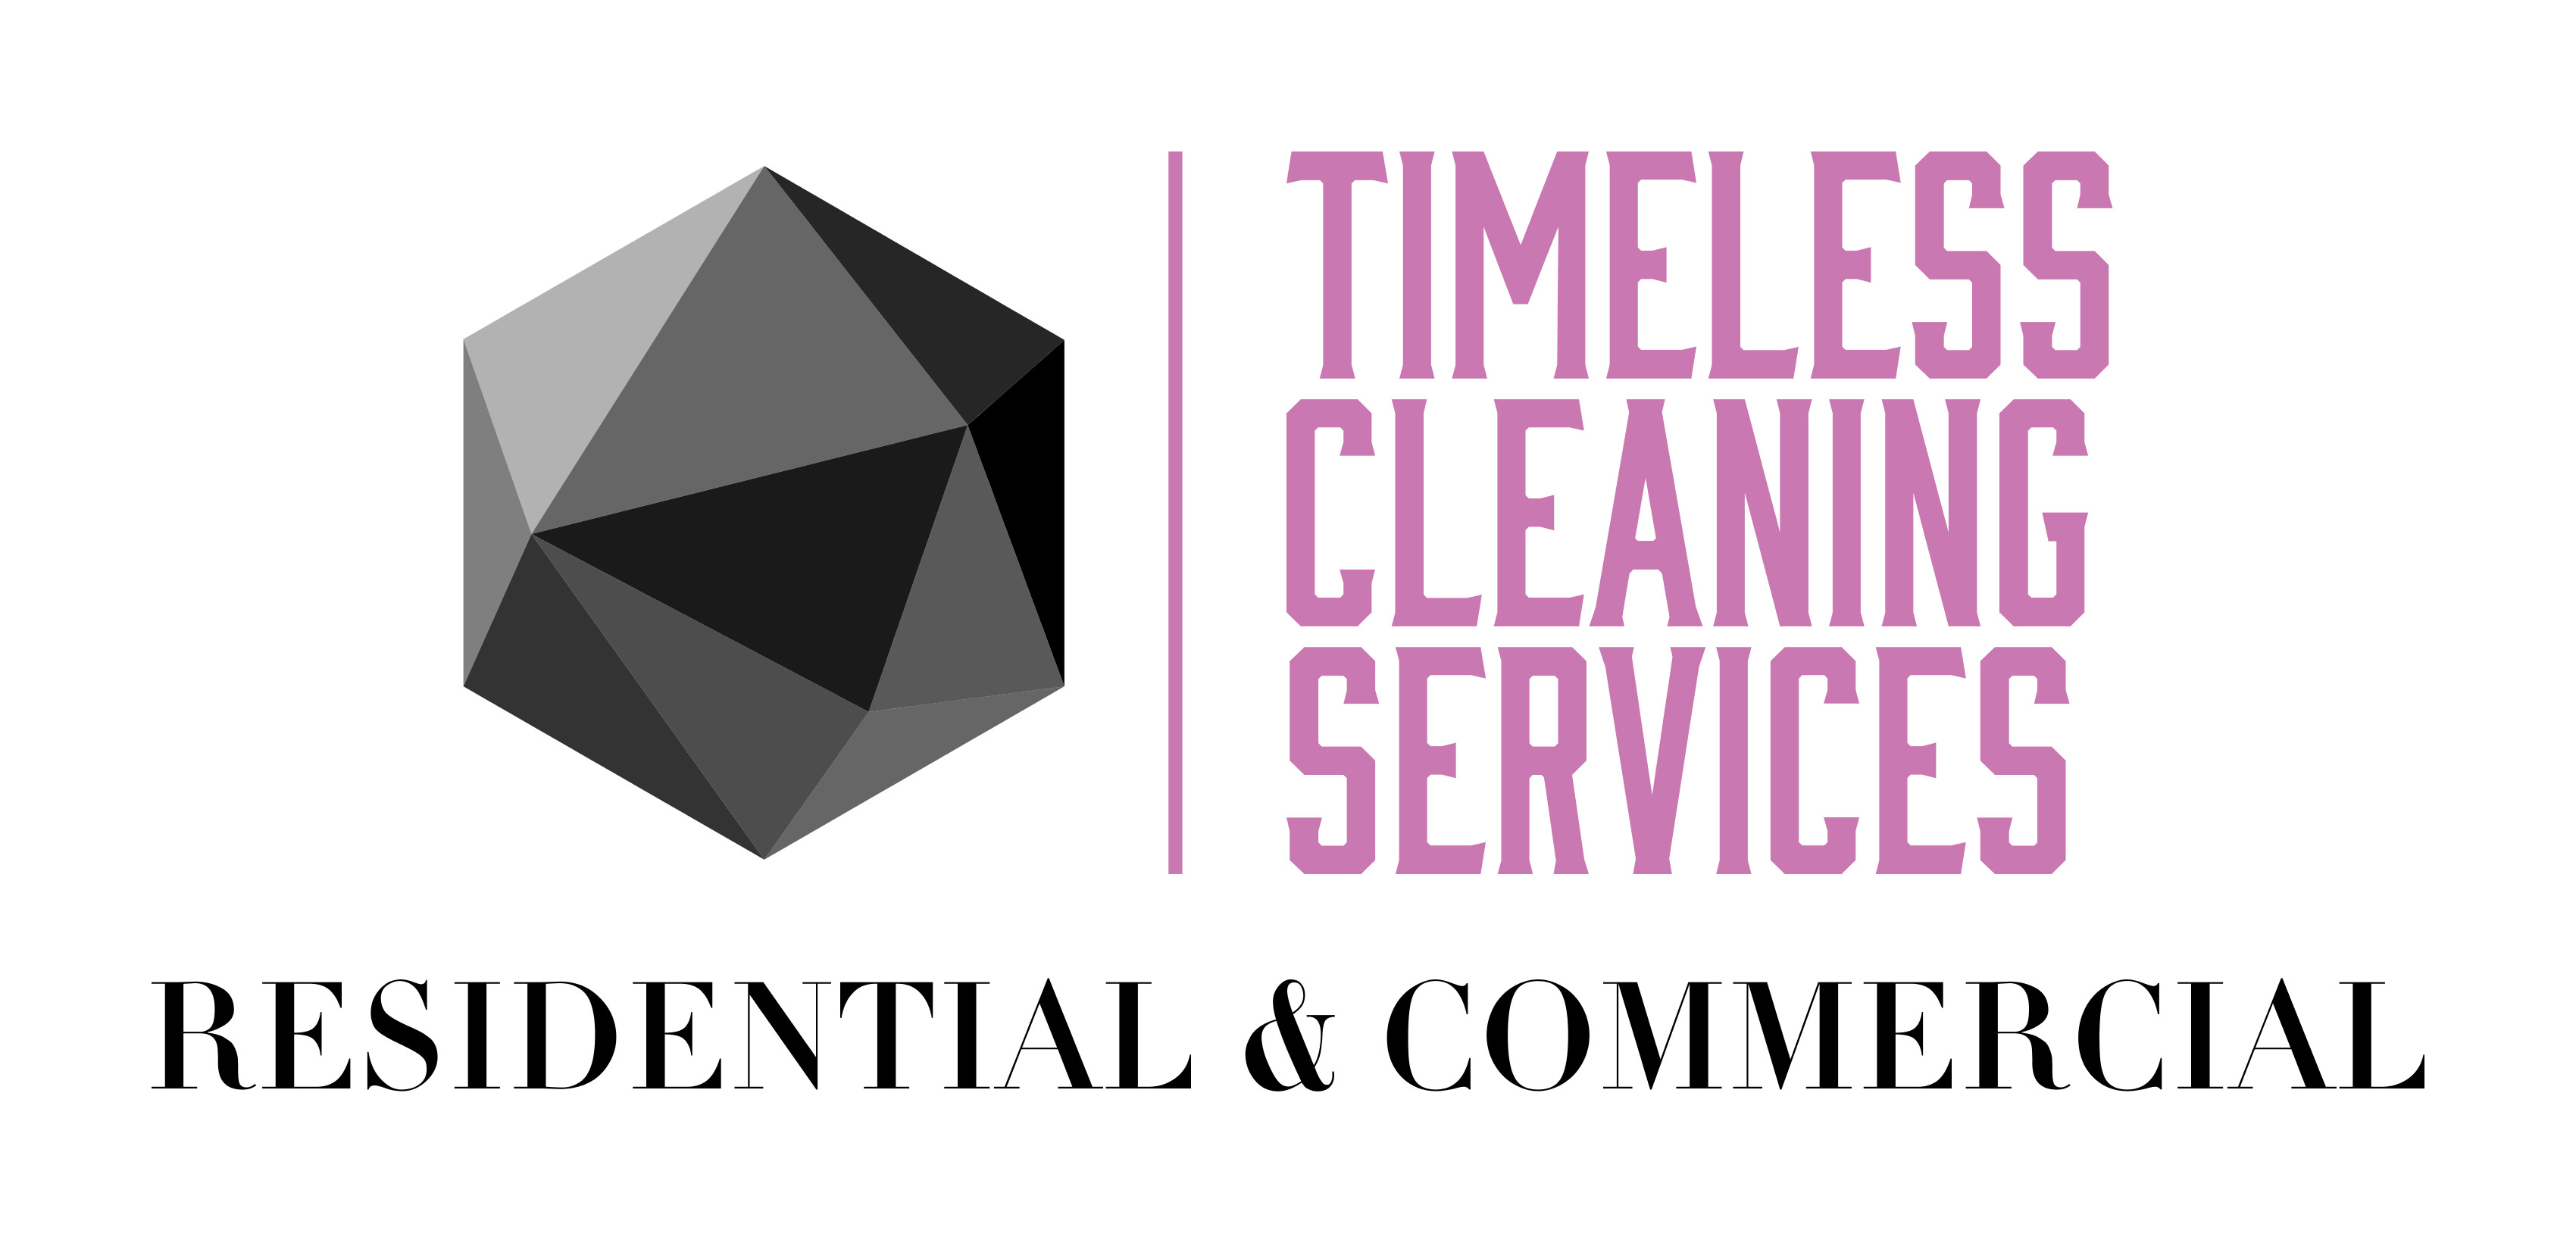 Timeless Cleaning Services Logo